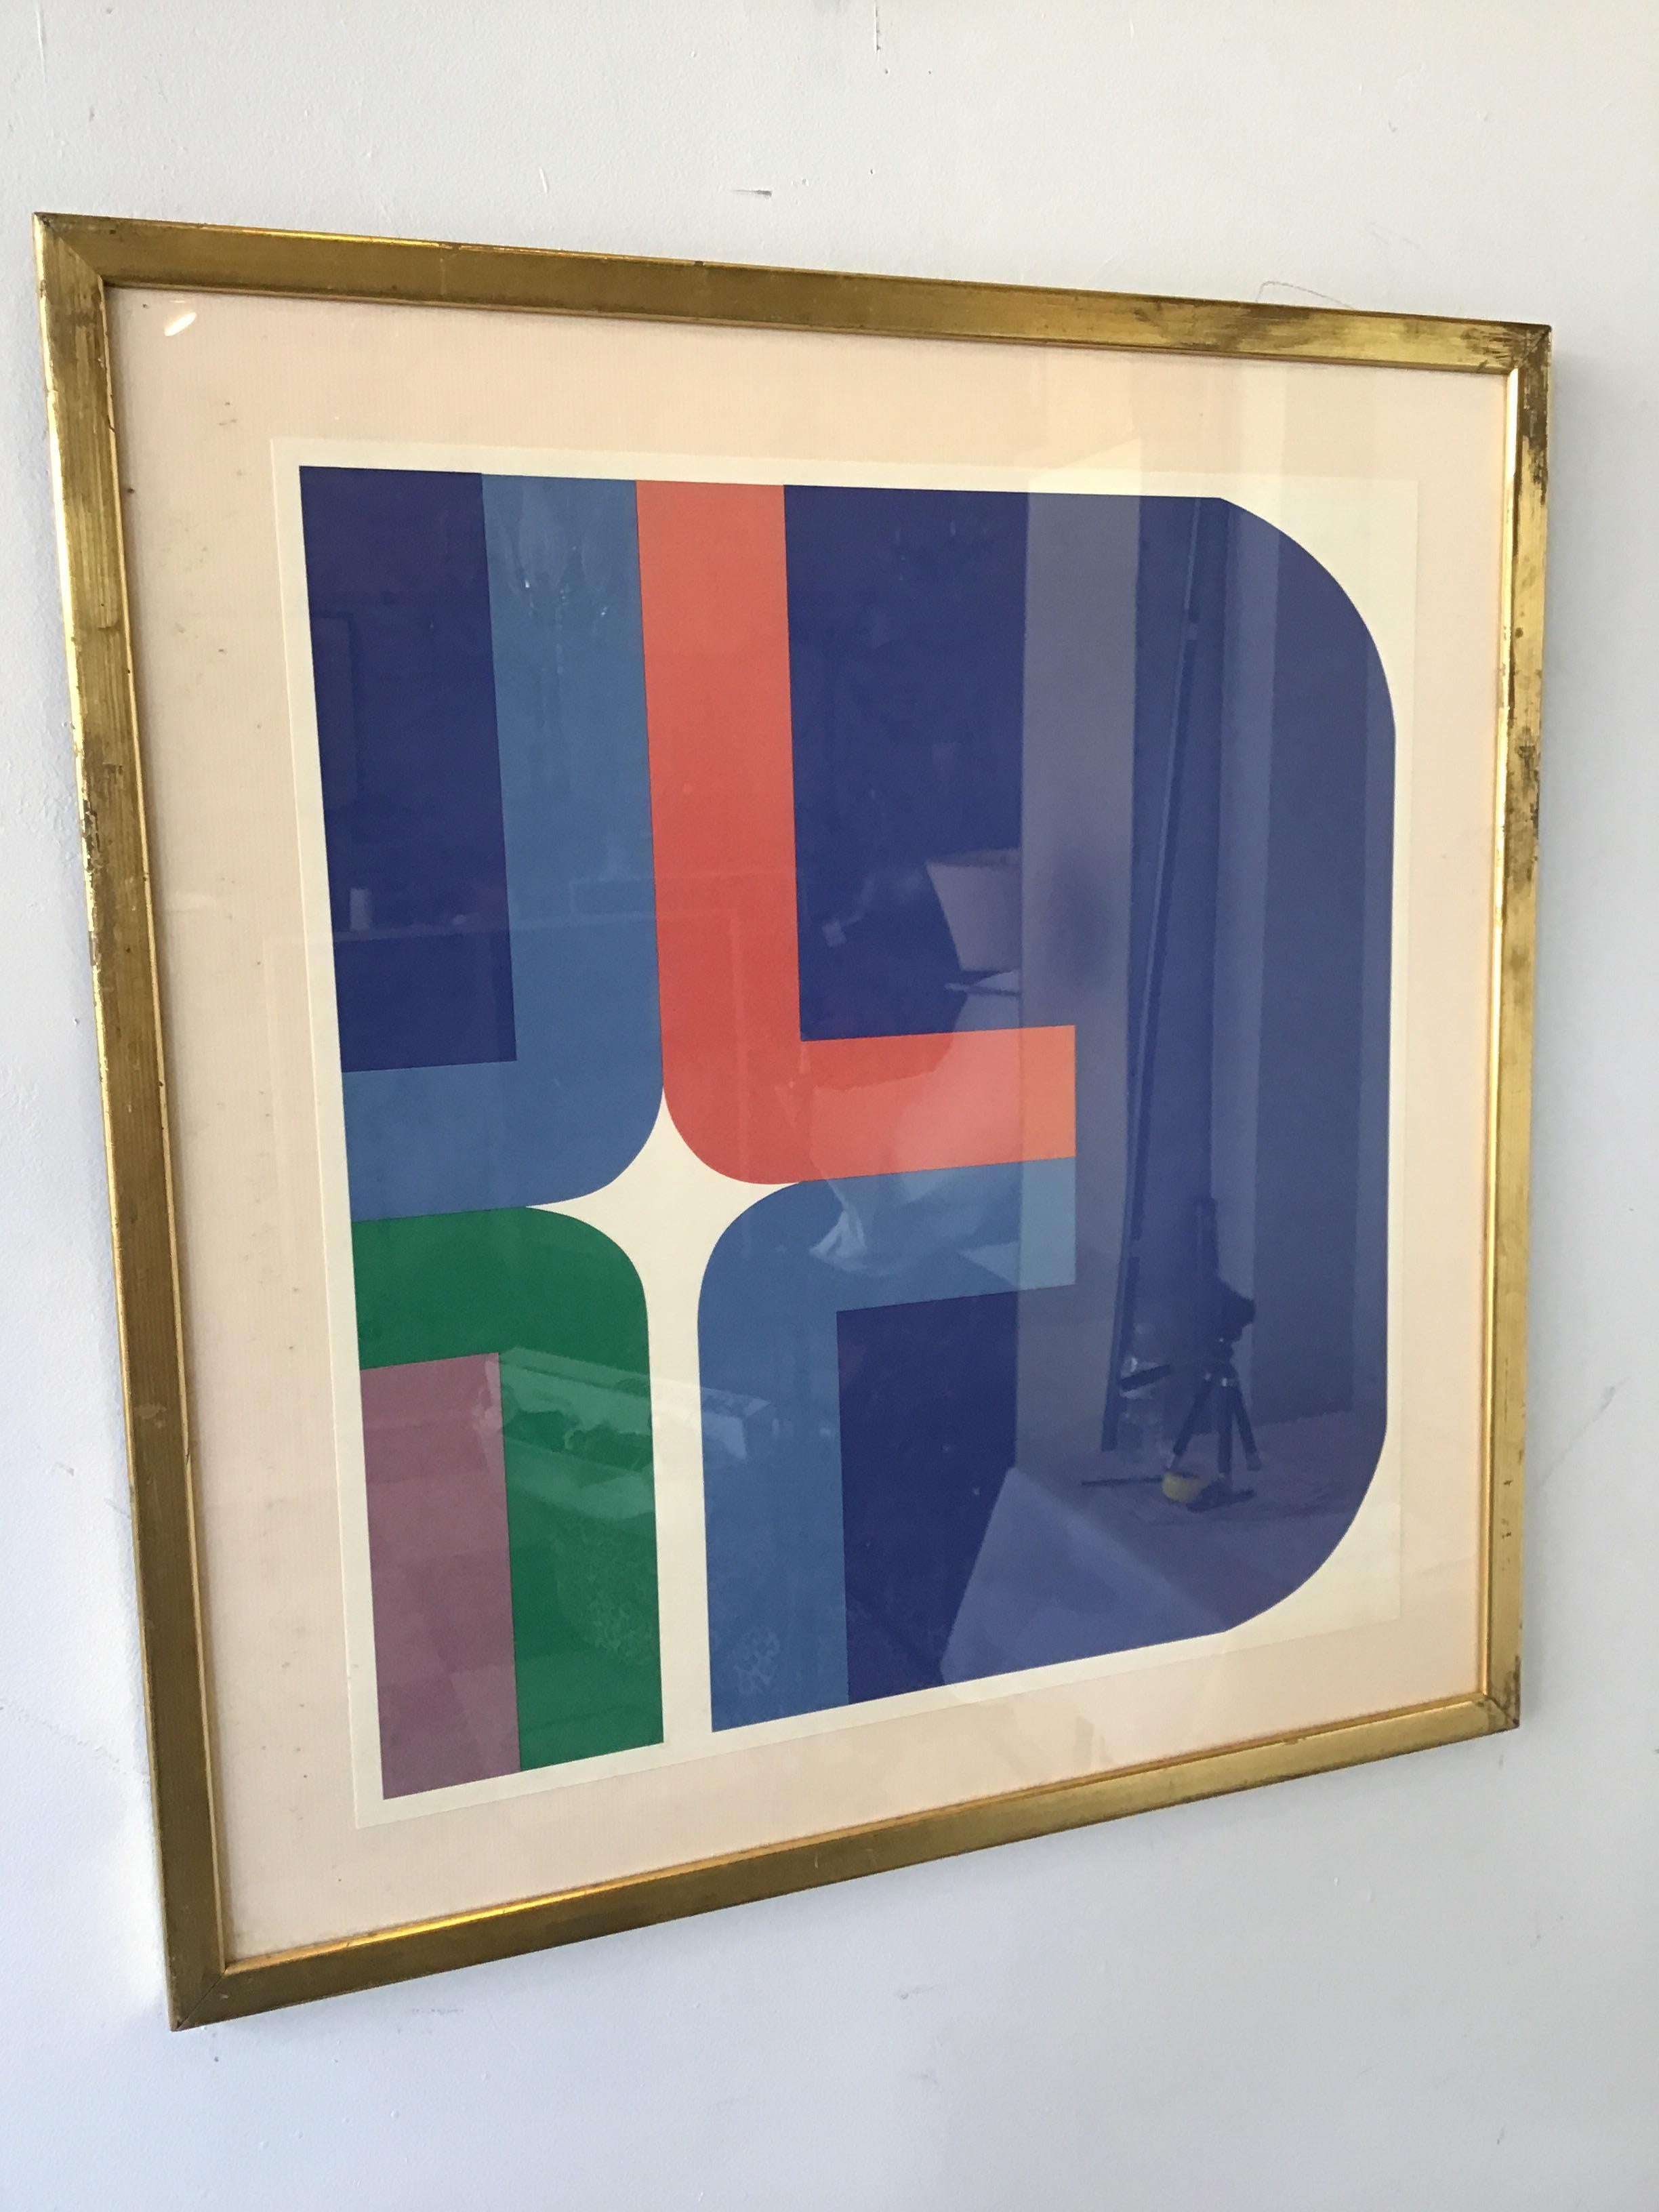 Karl Georg Pfahler Serigraph dated 1969. From the J Walter Thompson Ad Agency’s art collection.